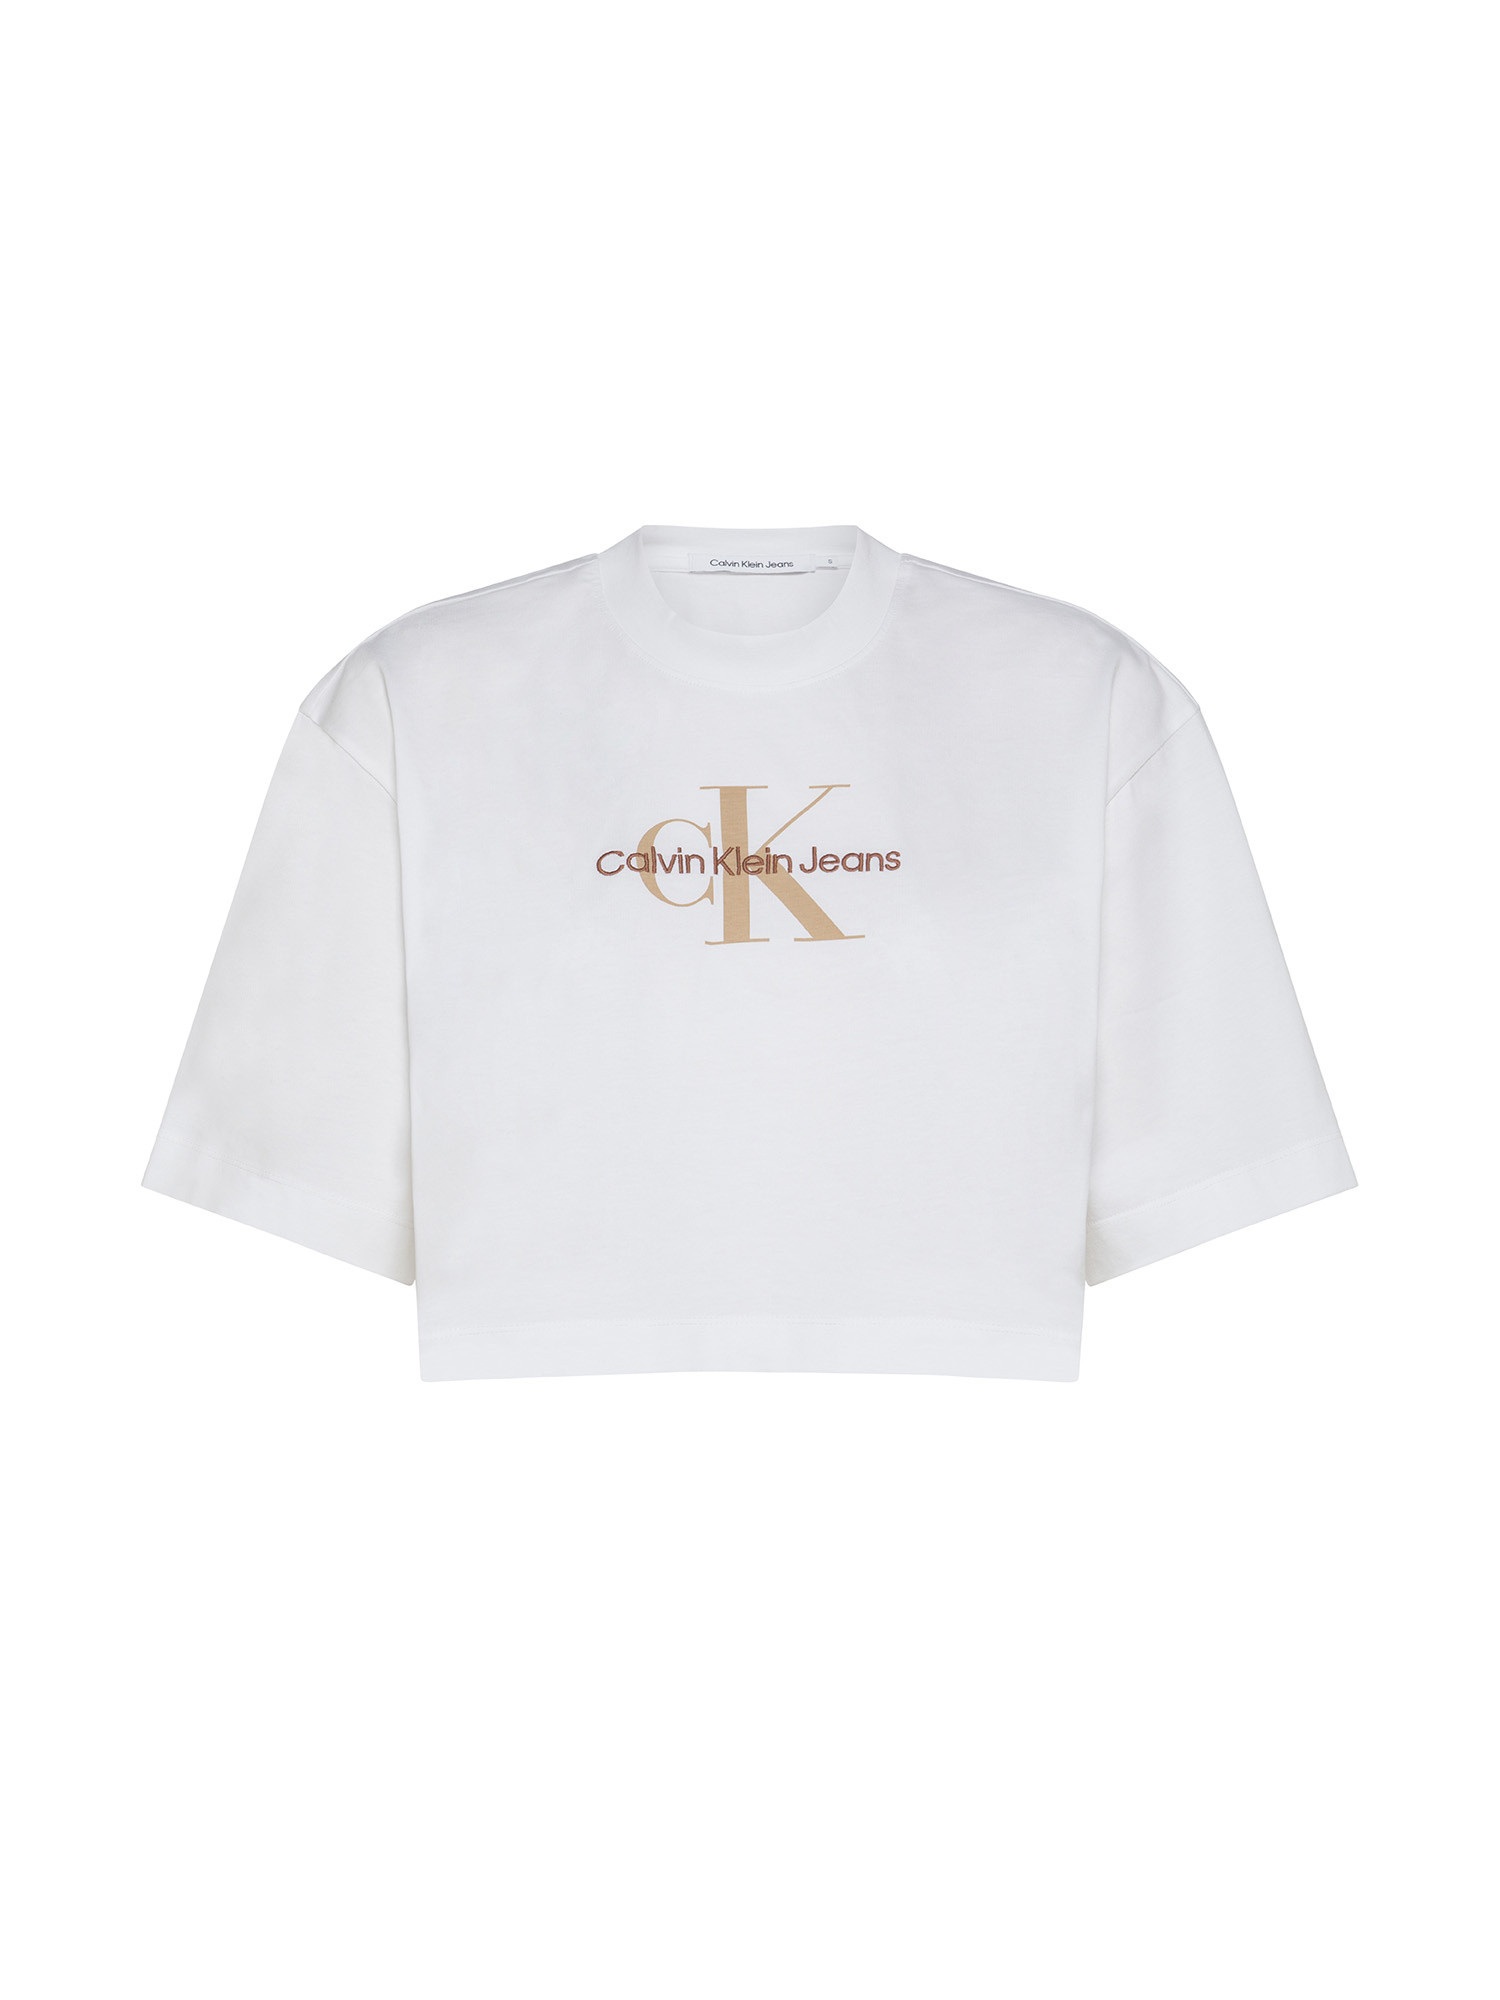 Calvin Klein Jeans - T-shirt crop in cotone con logo, Bianco, large image number 0